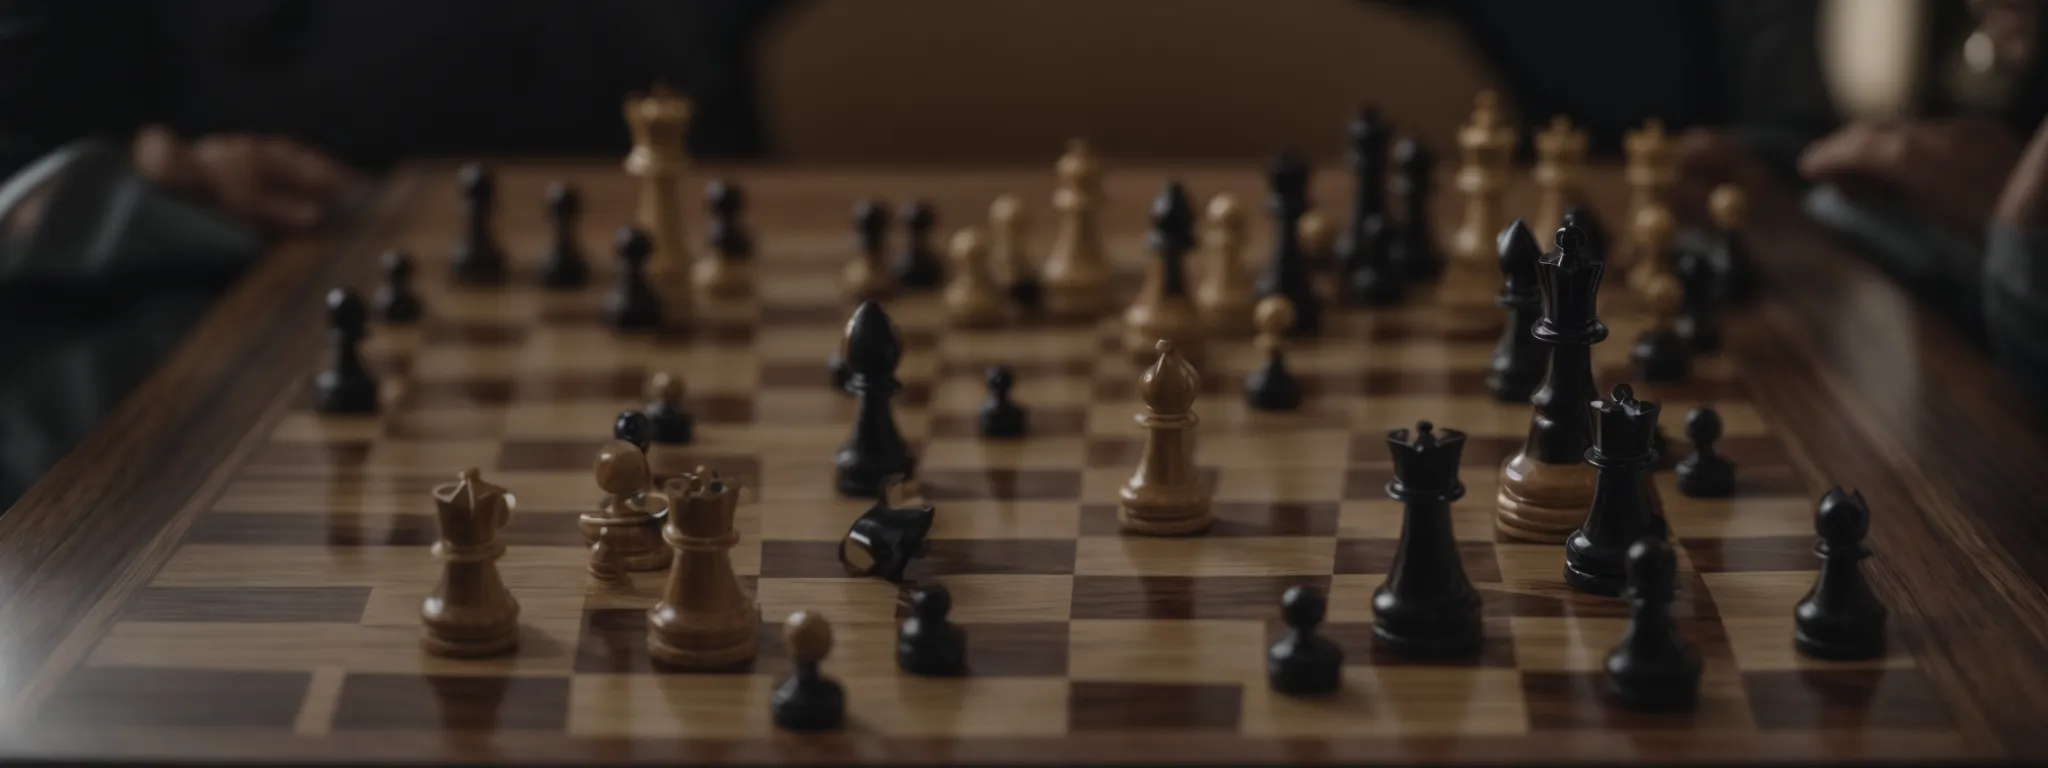 a chess board with a single, striking queen piece dominating the center, embodying strategic power and influence.